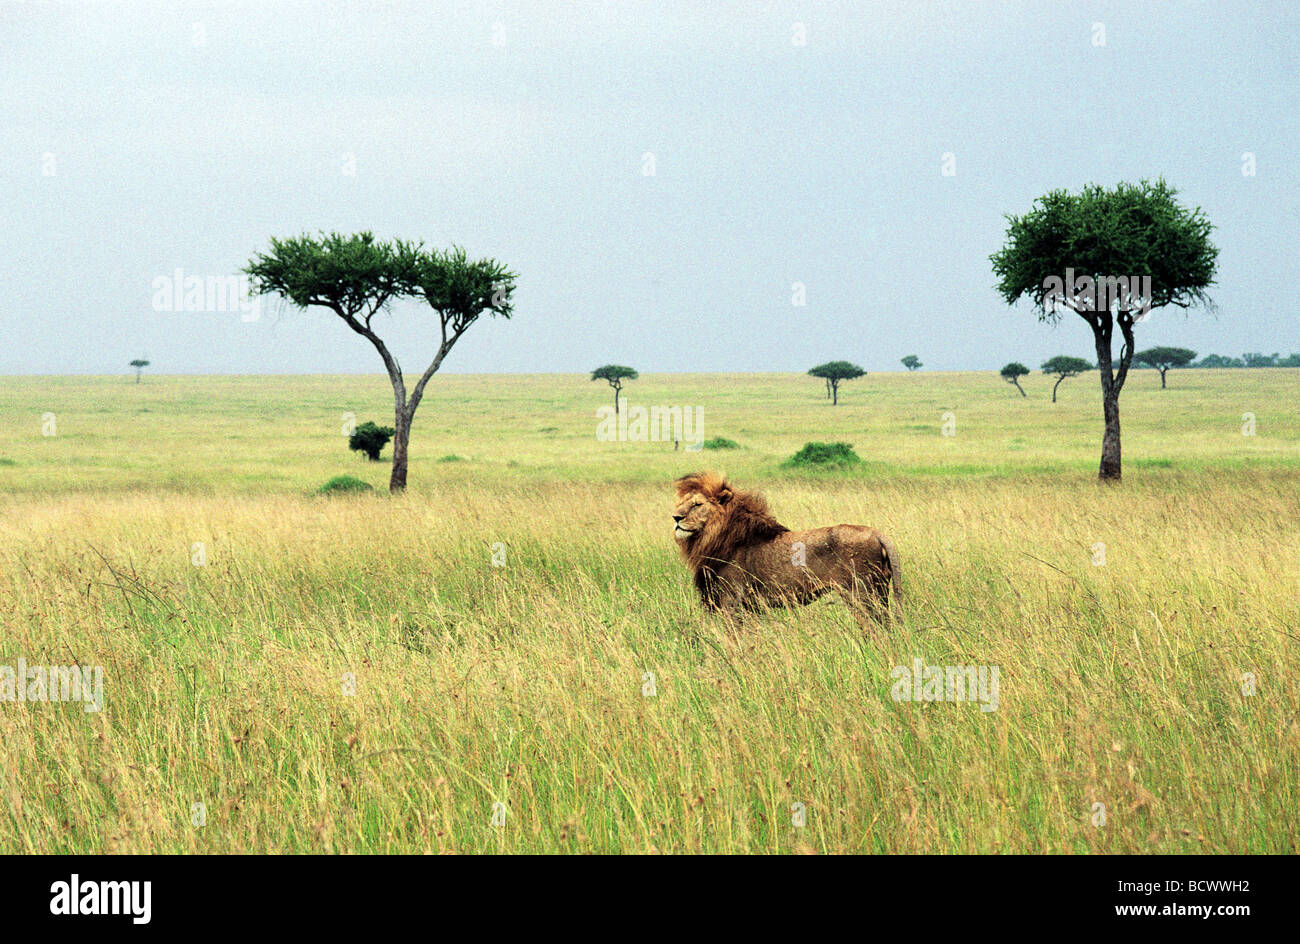 Male Lion on look out for prey in grassland savannah and Balanites trees Masai Mara National Reserve Kenya East Africa Stock Photo